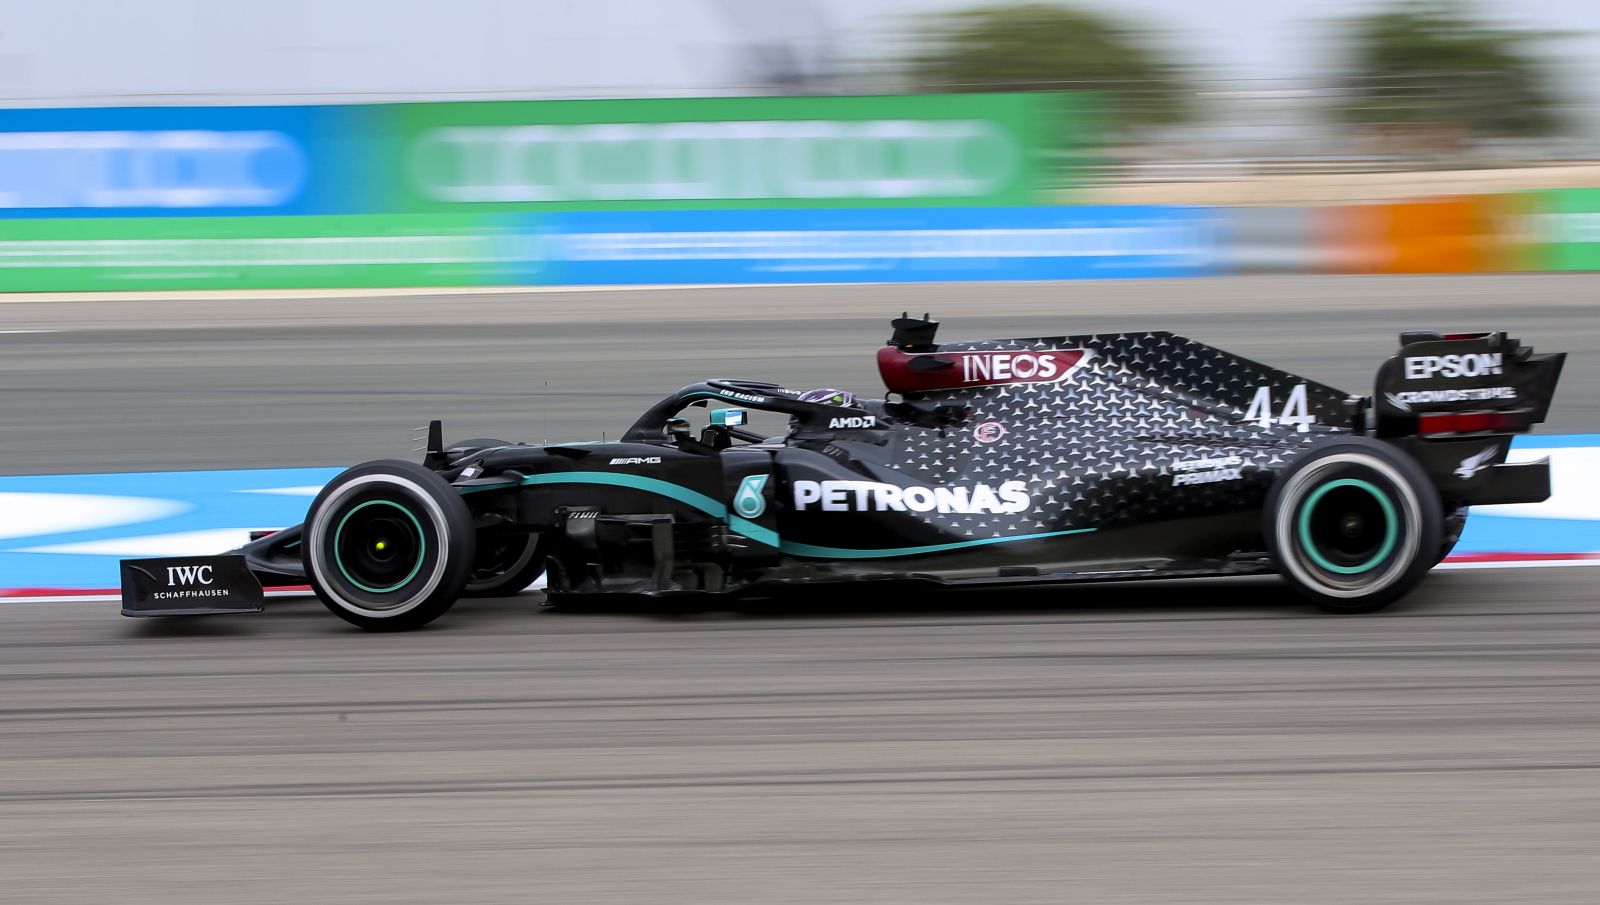 epa08845564 British Formula One driver Lewis Hamilton of Mercedes-AMG Petronas in action during the first practice session of the F1 Grand Prix of Bahrain at Bahrain International Circuit near Manama, Bahrain, 27 November 2020. The Formula One Grand Prix of Bahrain will take place on 29 November 2020.  EPA/TOLGA BOZOGLU / POOL